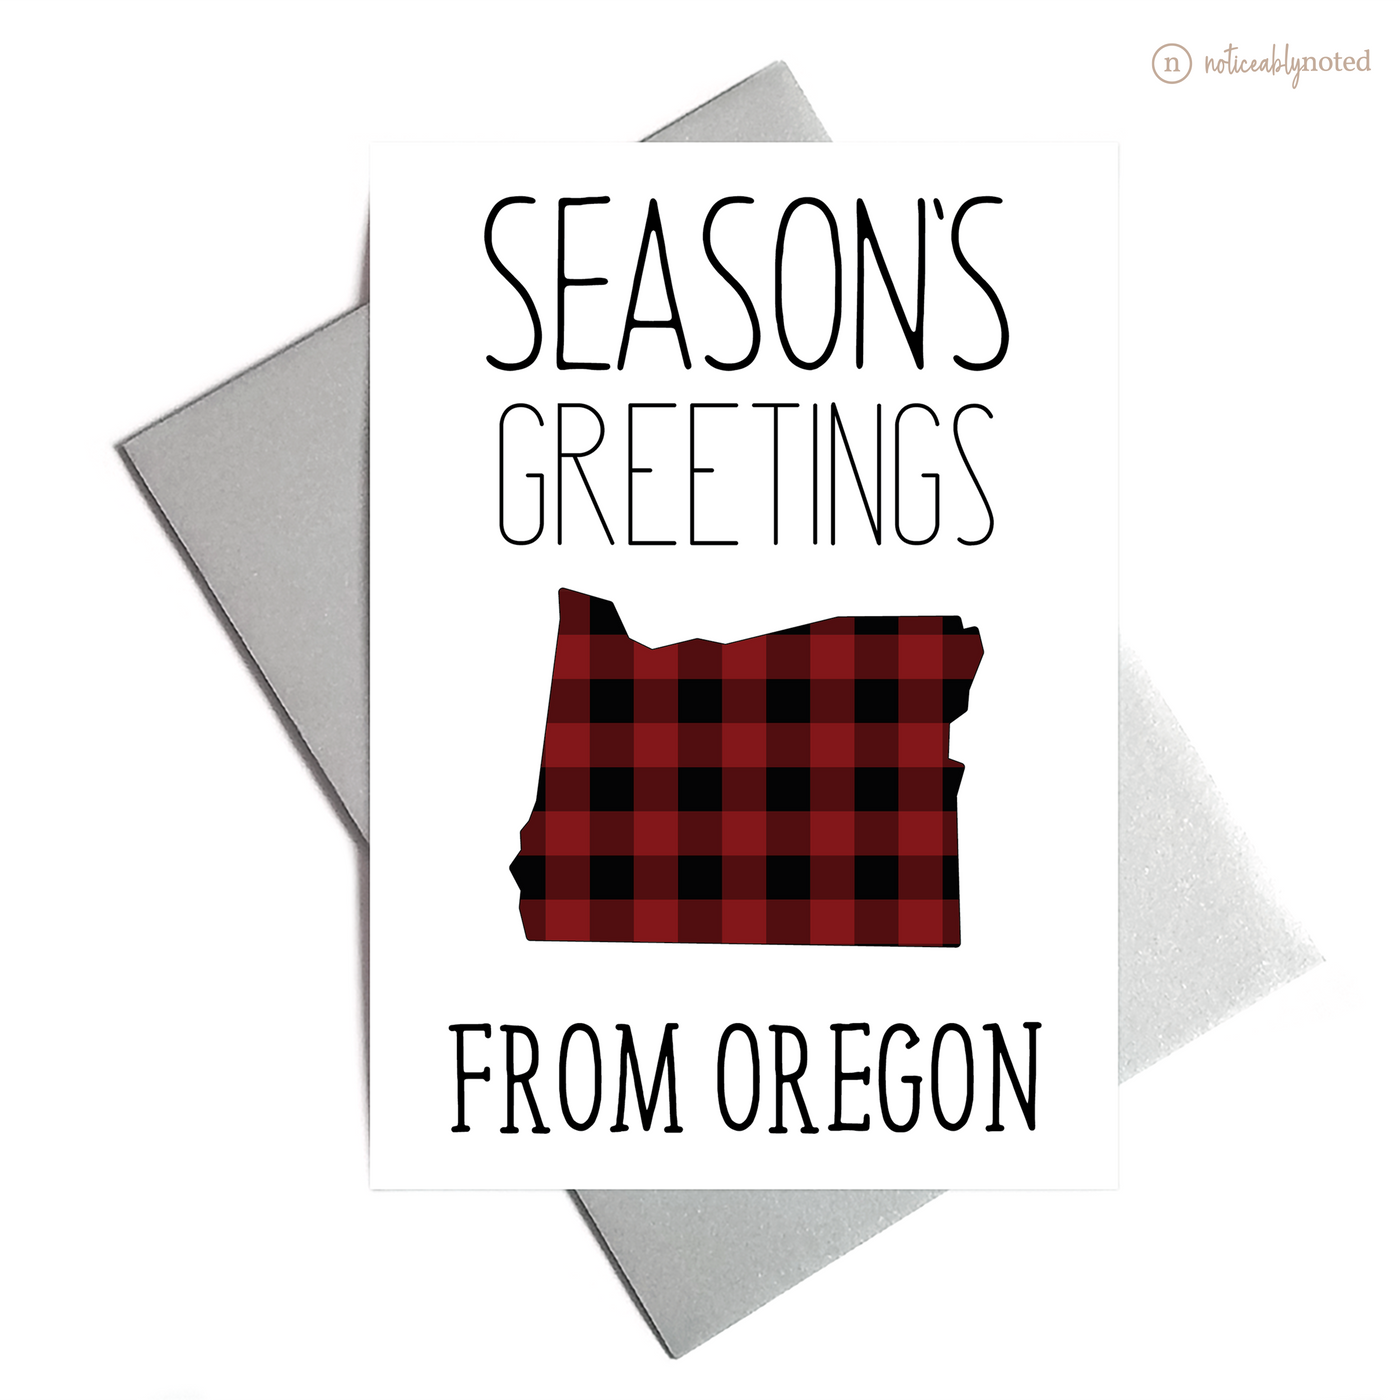 Oregon Christmas Cards | Noticeably Noted